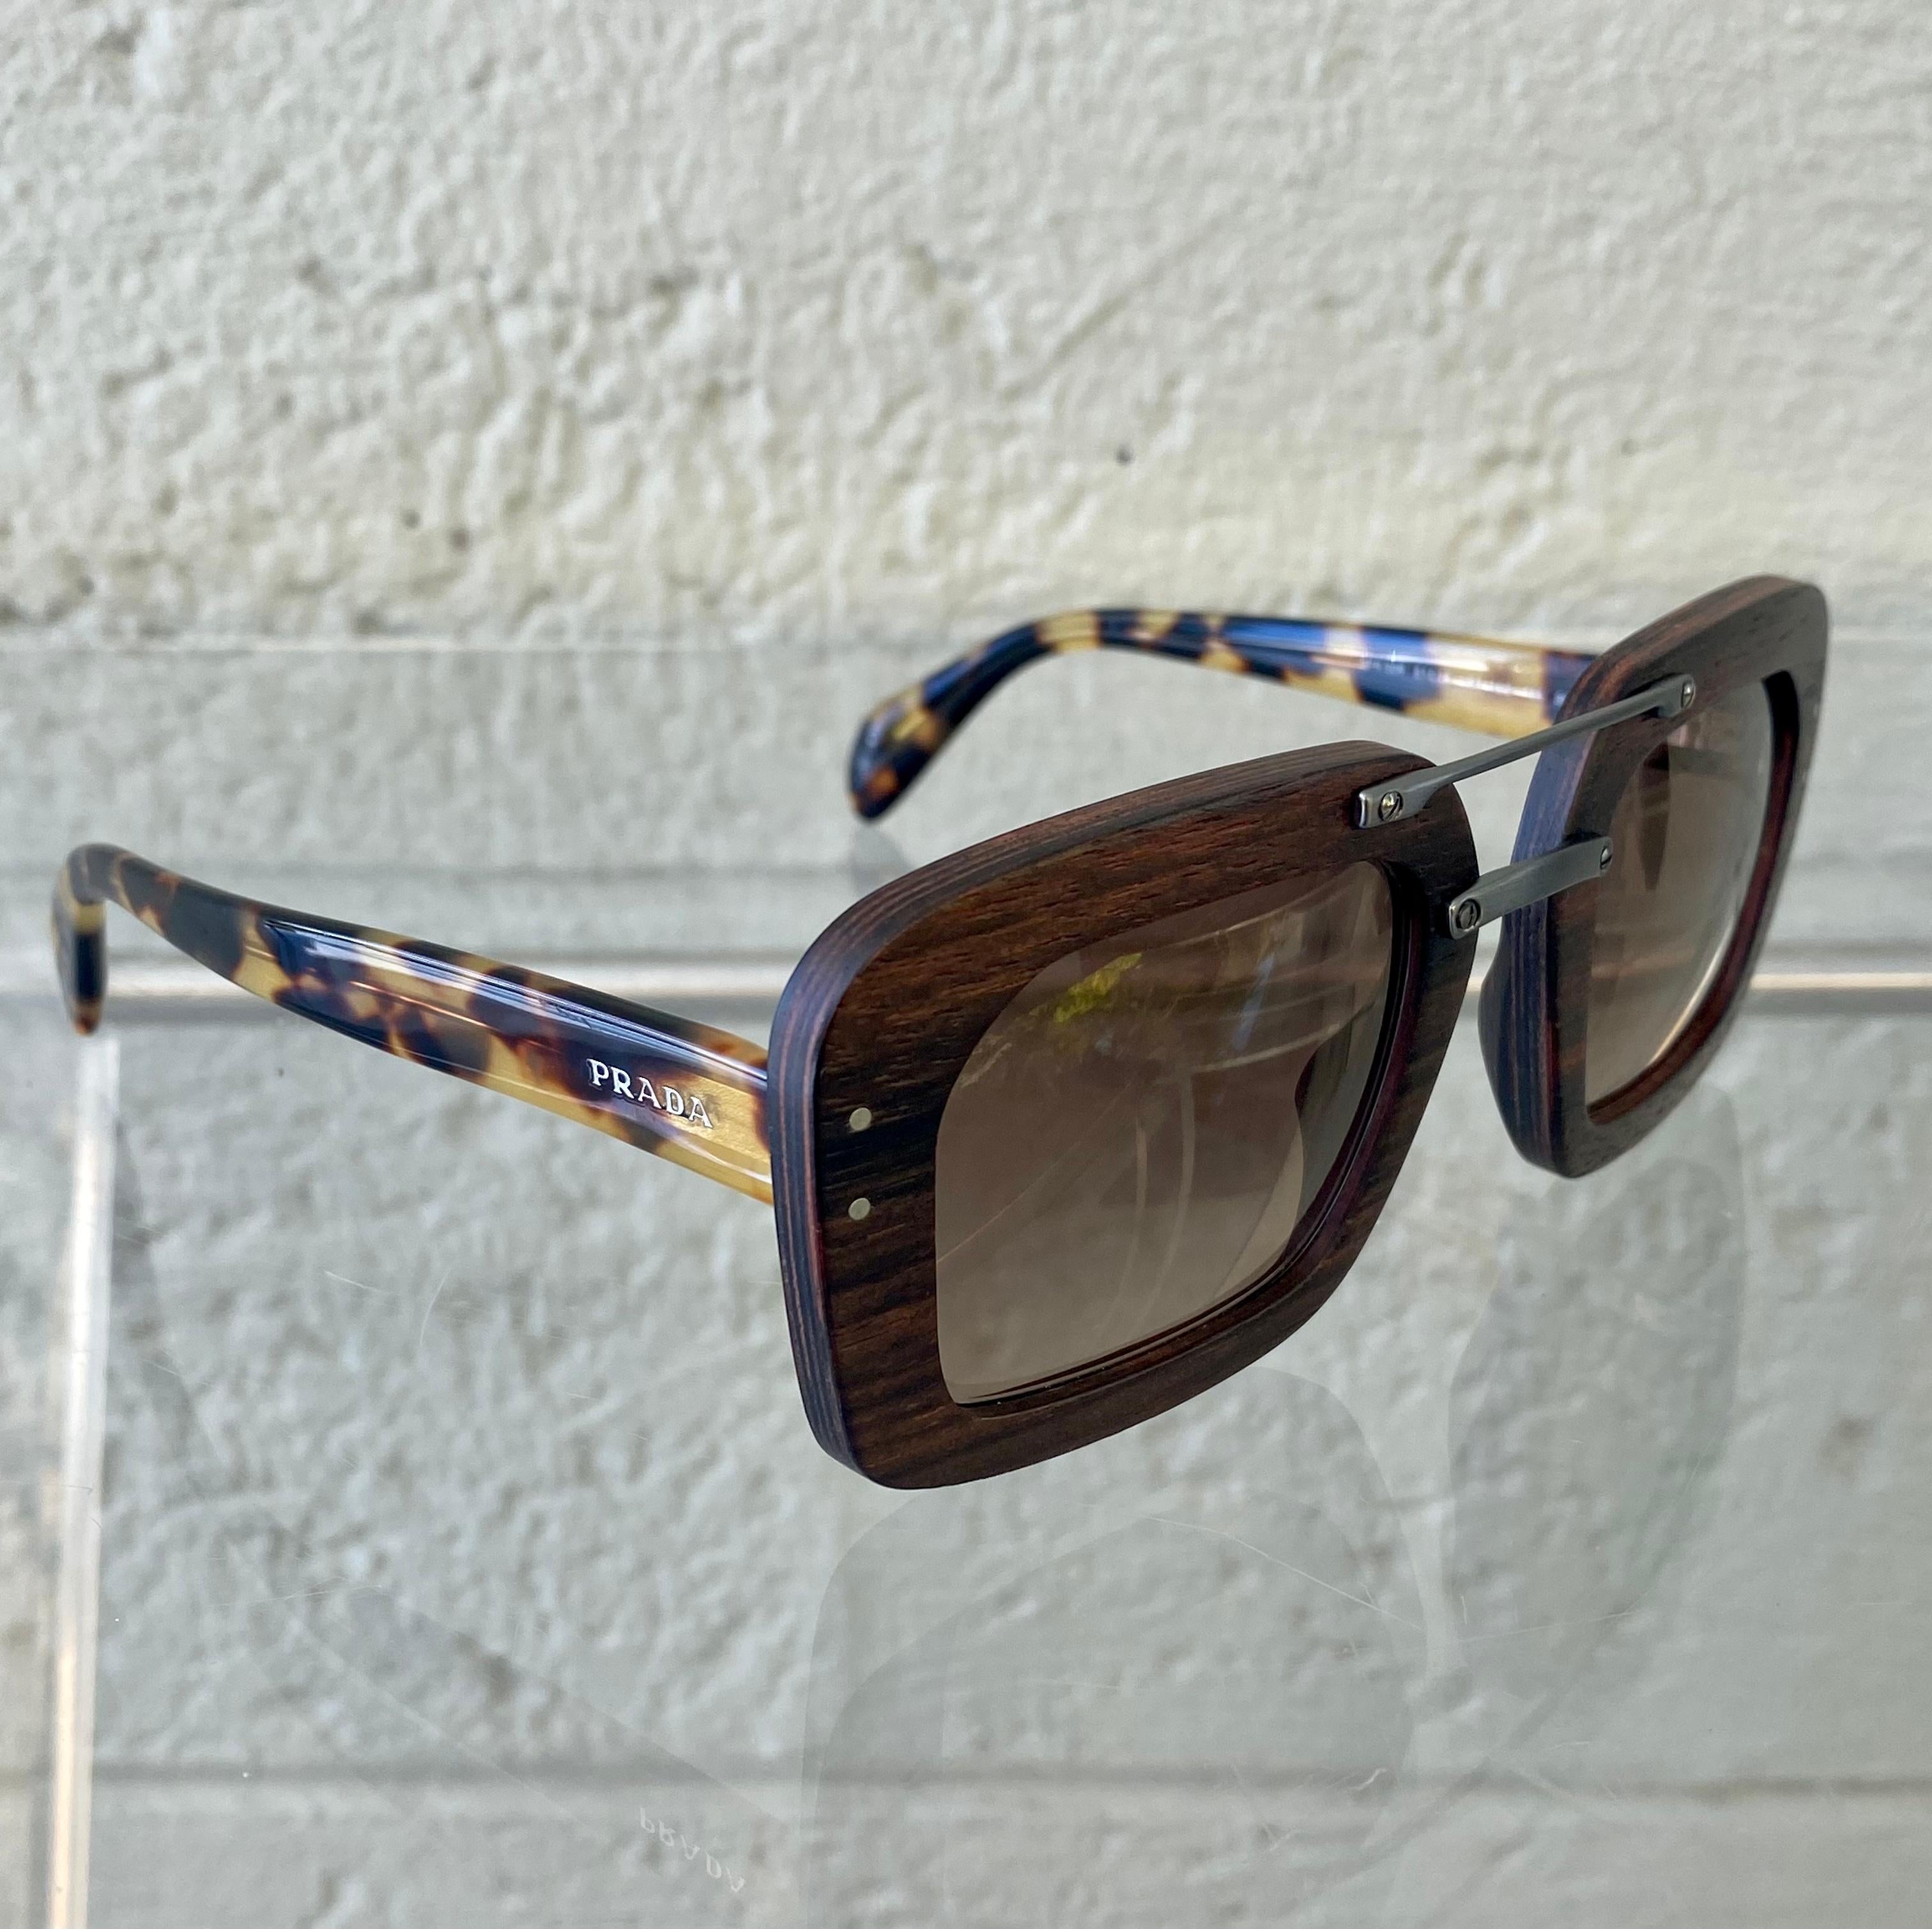 Classic and Timeless Prada sunglasses. Made from Acetate and Polycarbonate , these Gucci sunglasses are durable and trendy. The lenses matches well with the Tortoiseshell frames, a great combination that will keep you looking chic and stylish!